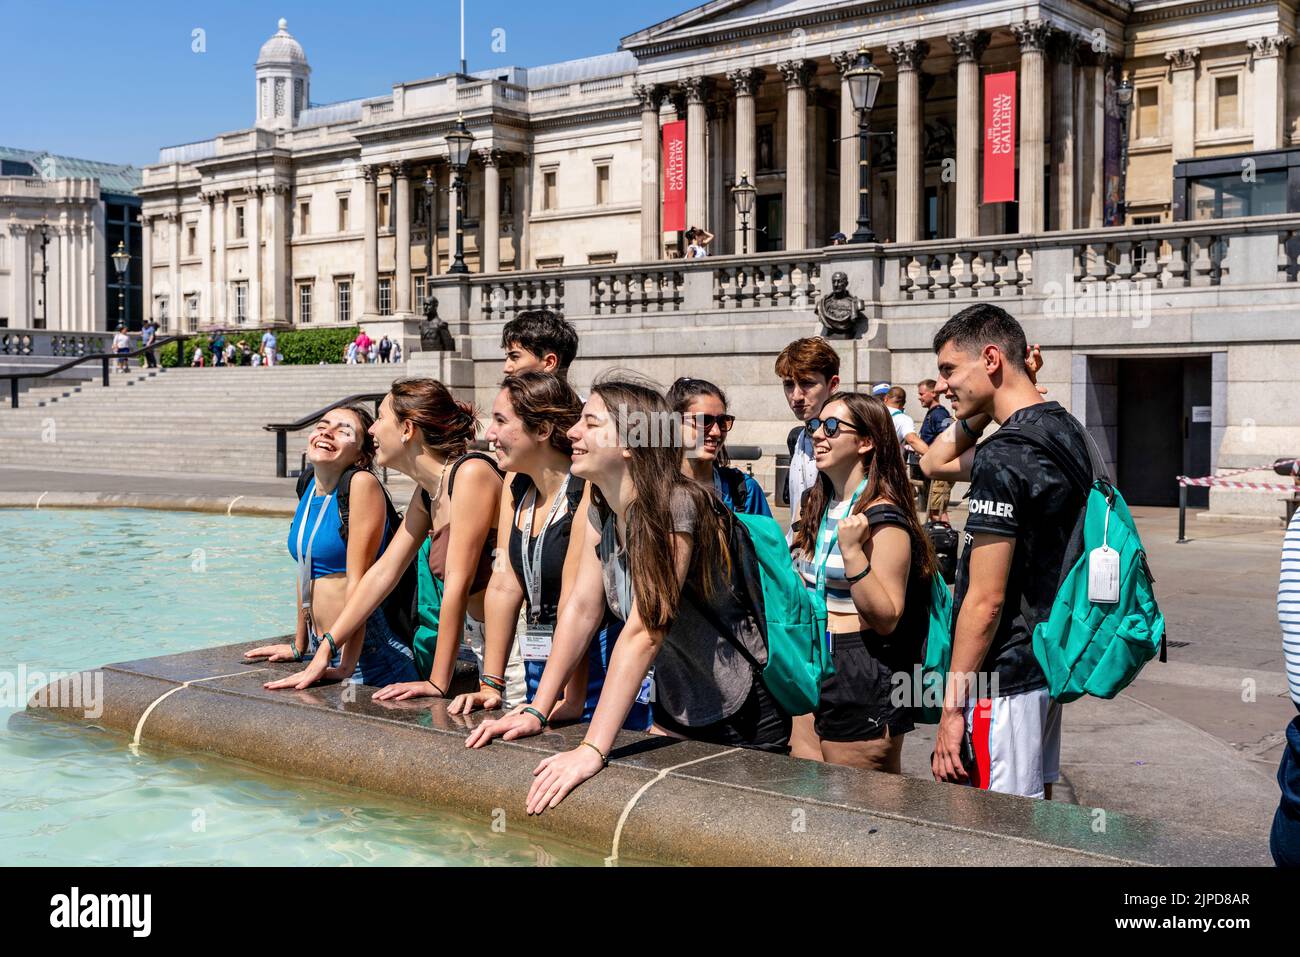 A Group Of Young Tourists Cool Down In The Spray Of The Fountains In Trafalgar Square On The Hottest Day Ever Recorded In The Capital, London, UK Stock Photo